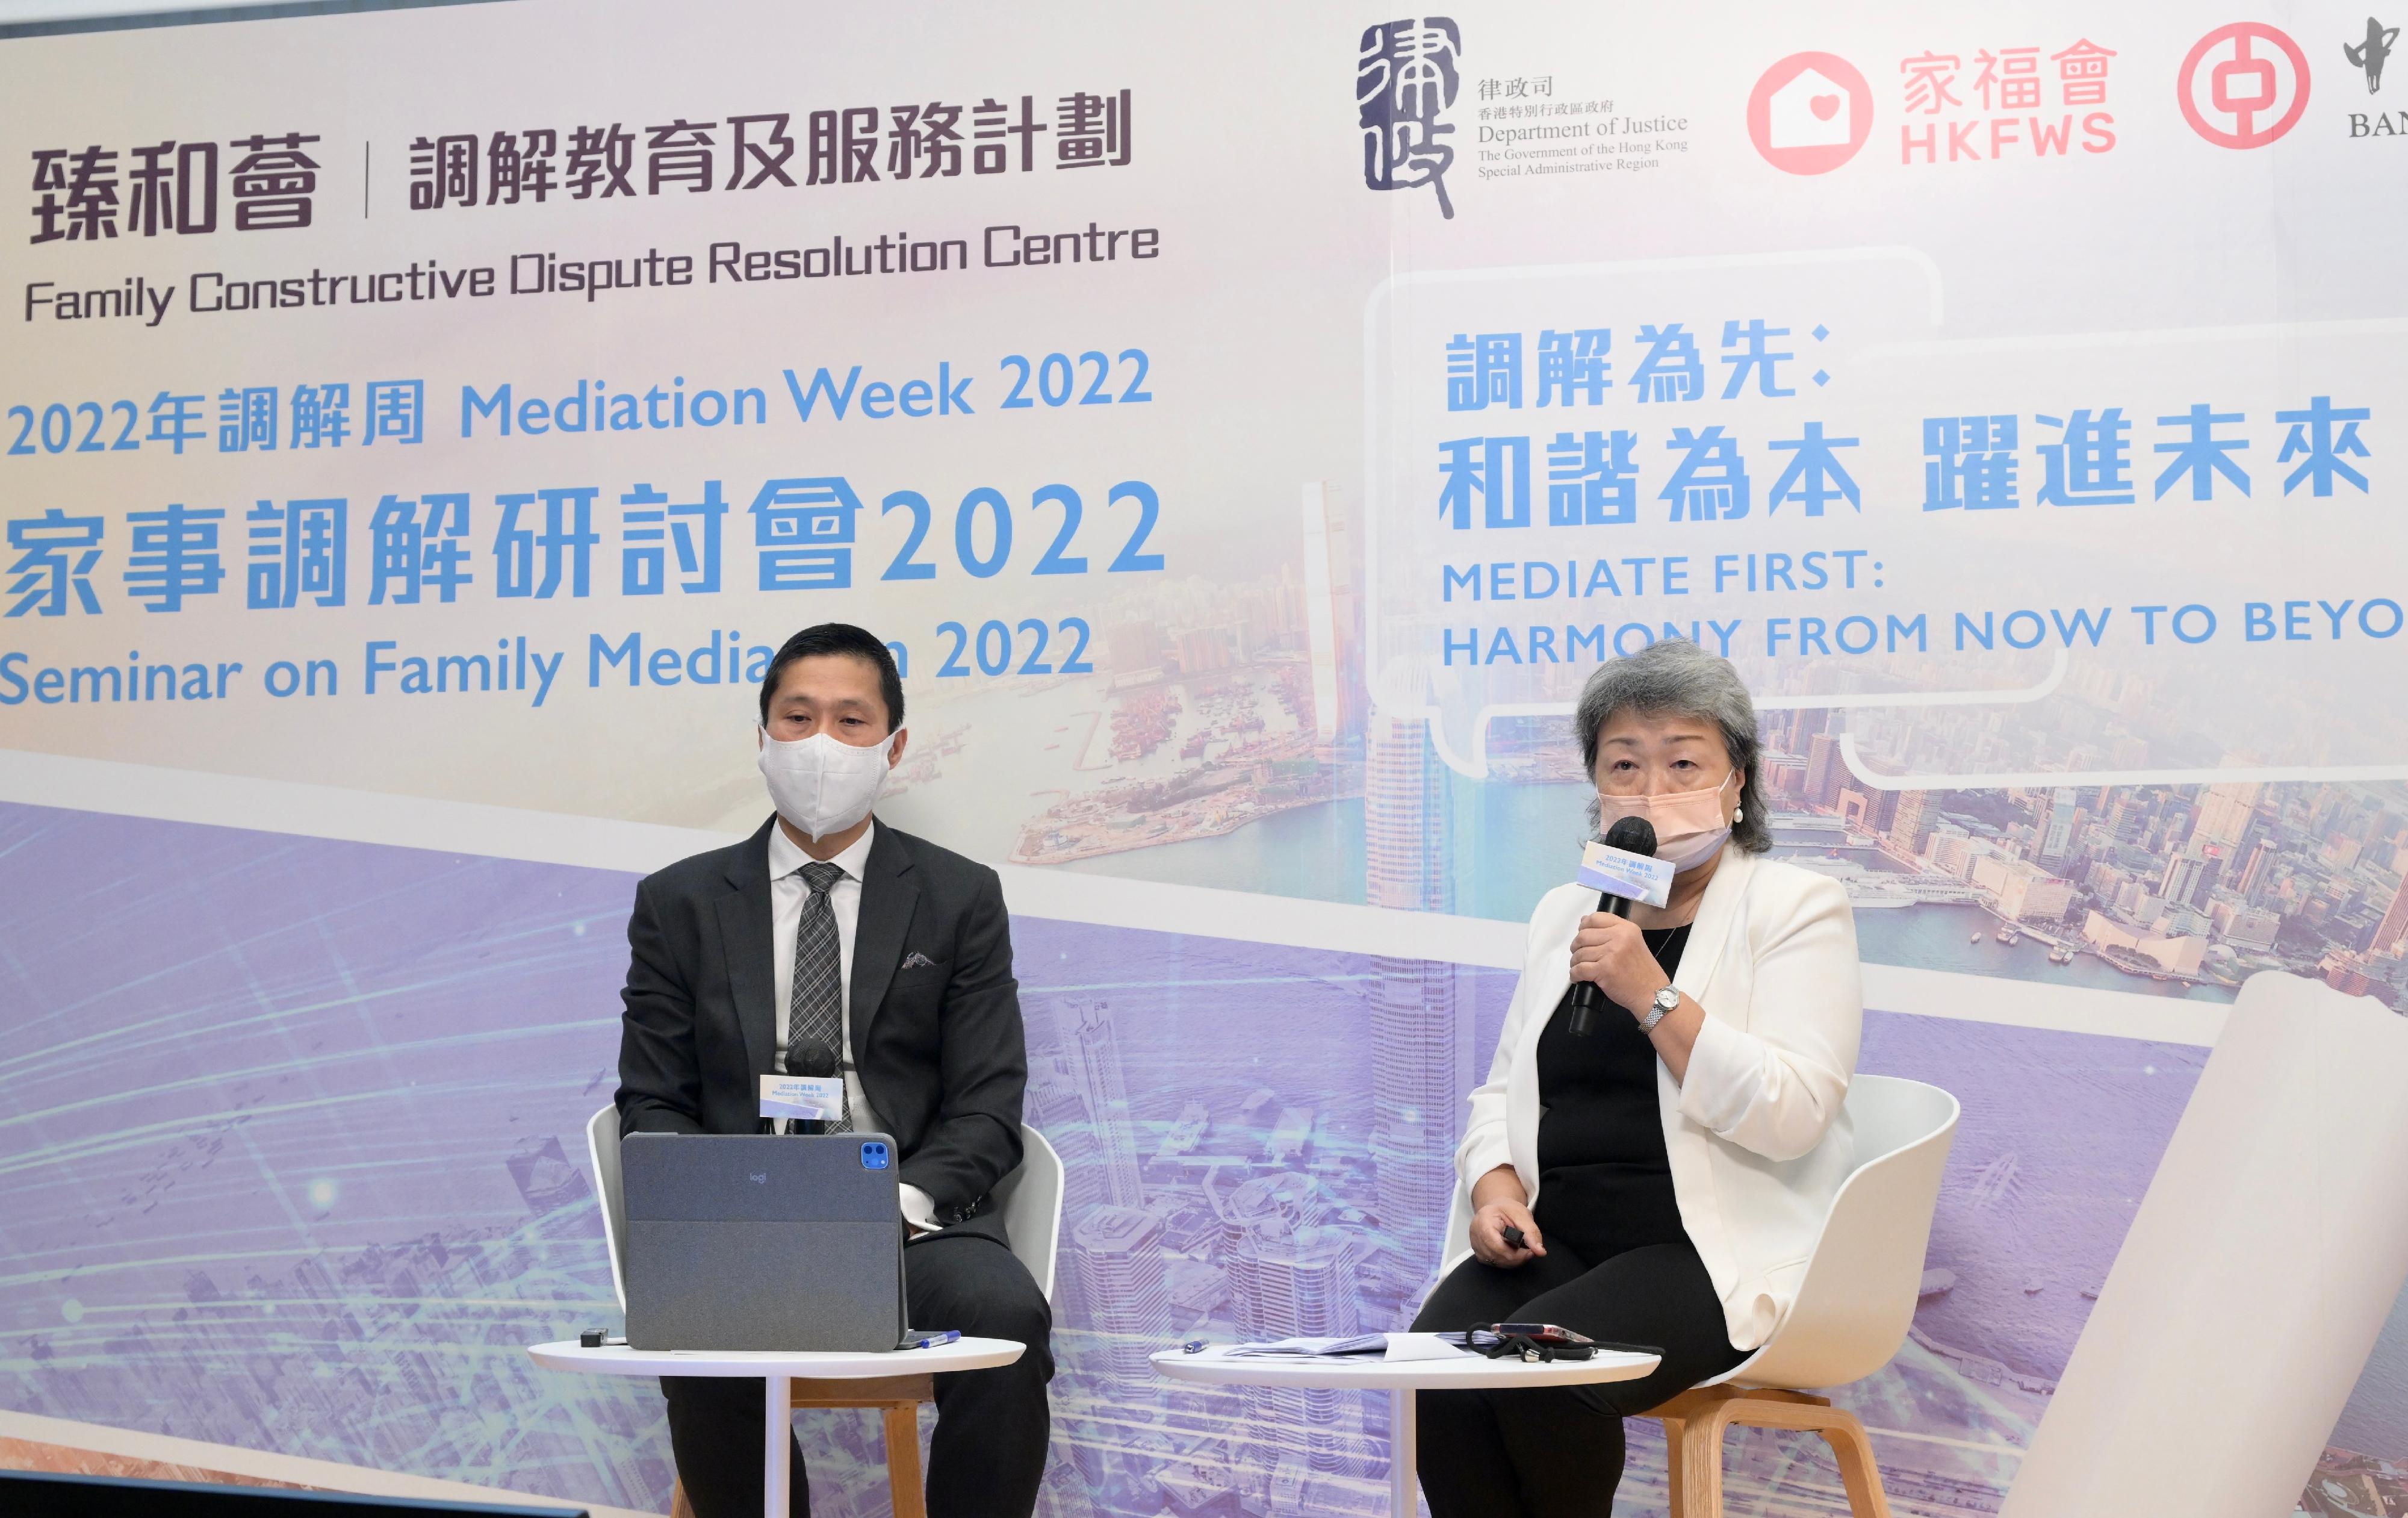 The Seminar on Family Mediation 2022 jointly organised by the Department of Justice and the Hong Kong Family Welfare Society was held today (May 3) to promote the wider use of mediation in resolving family disputes. Photo shows Hong Kong legal practitioners and mediators Mr Vod Chan (left) and Ms Stephanie Cheung (right) at the seminar.